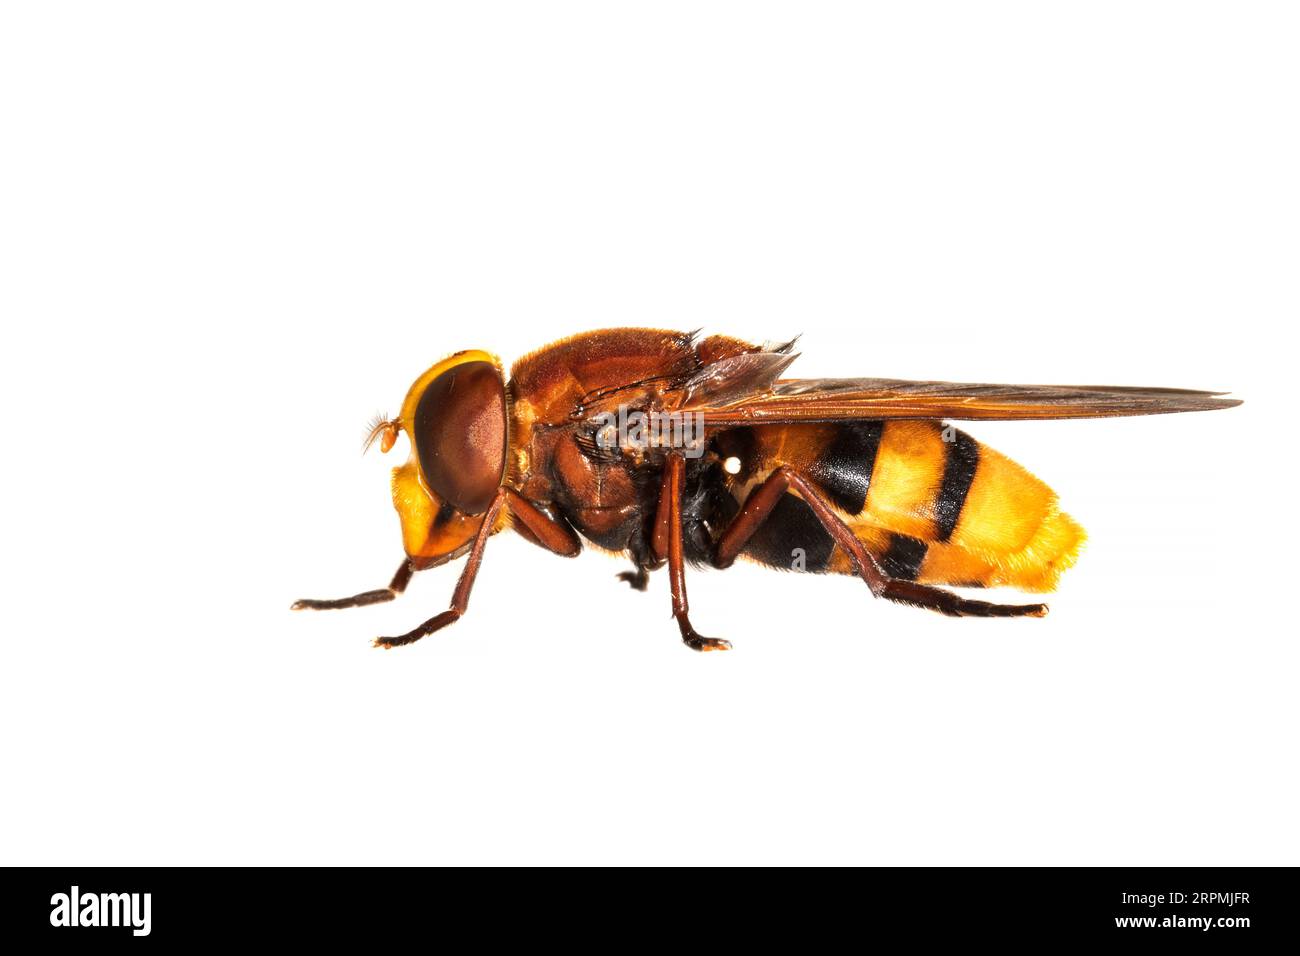 Hornet mimic hoverfly (Volucella zonaria, Volucella zonalis), side view, cut out, Netherlands Stock Photo